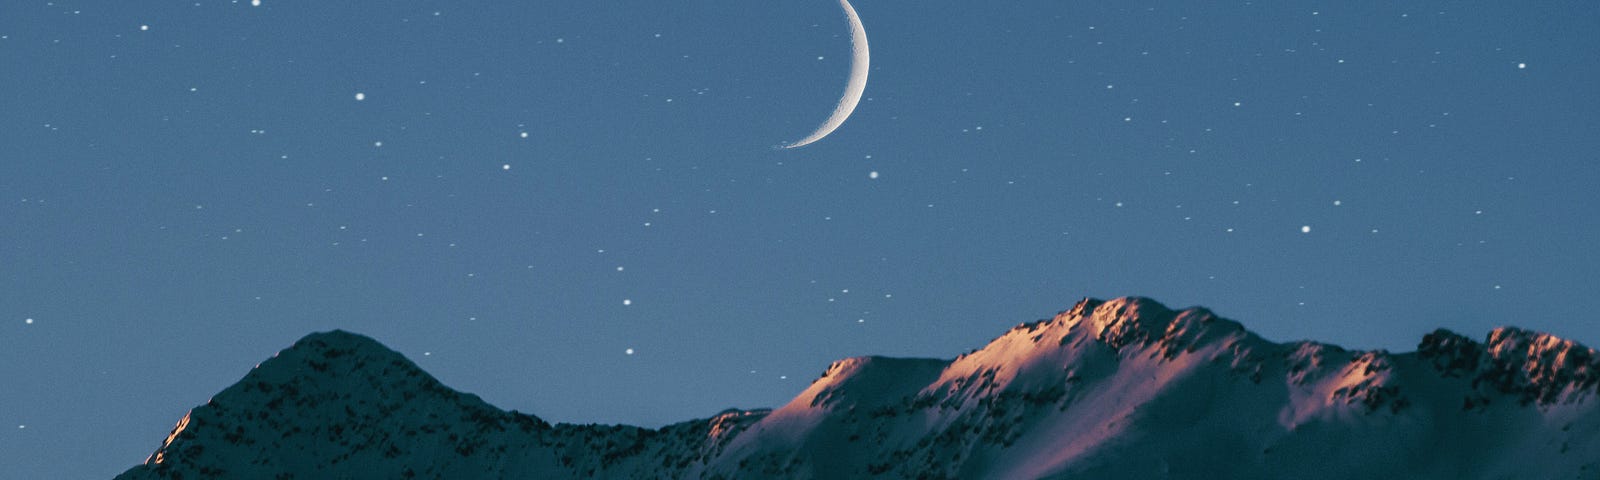 A crescent moon above mountains